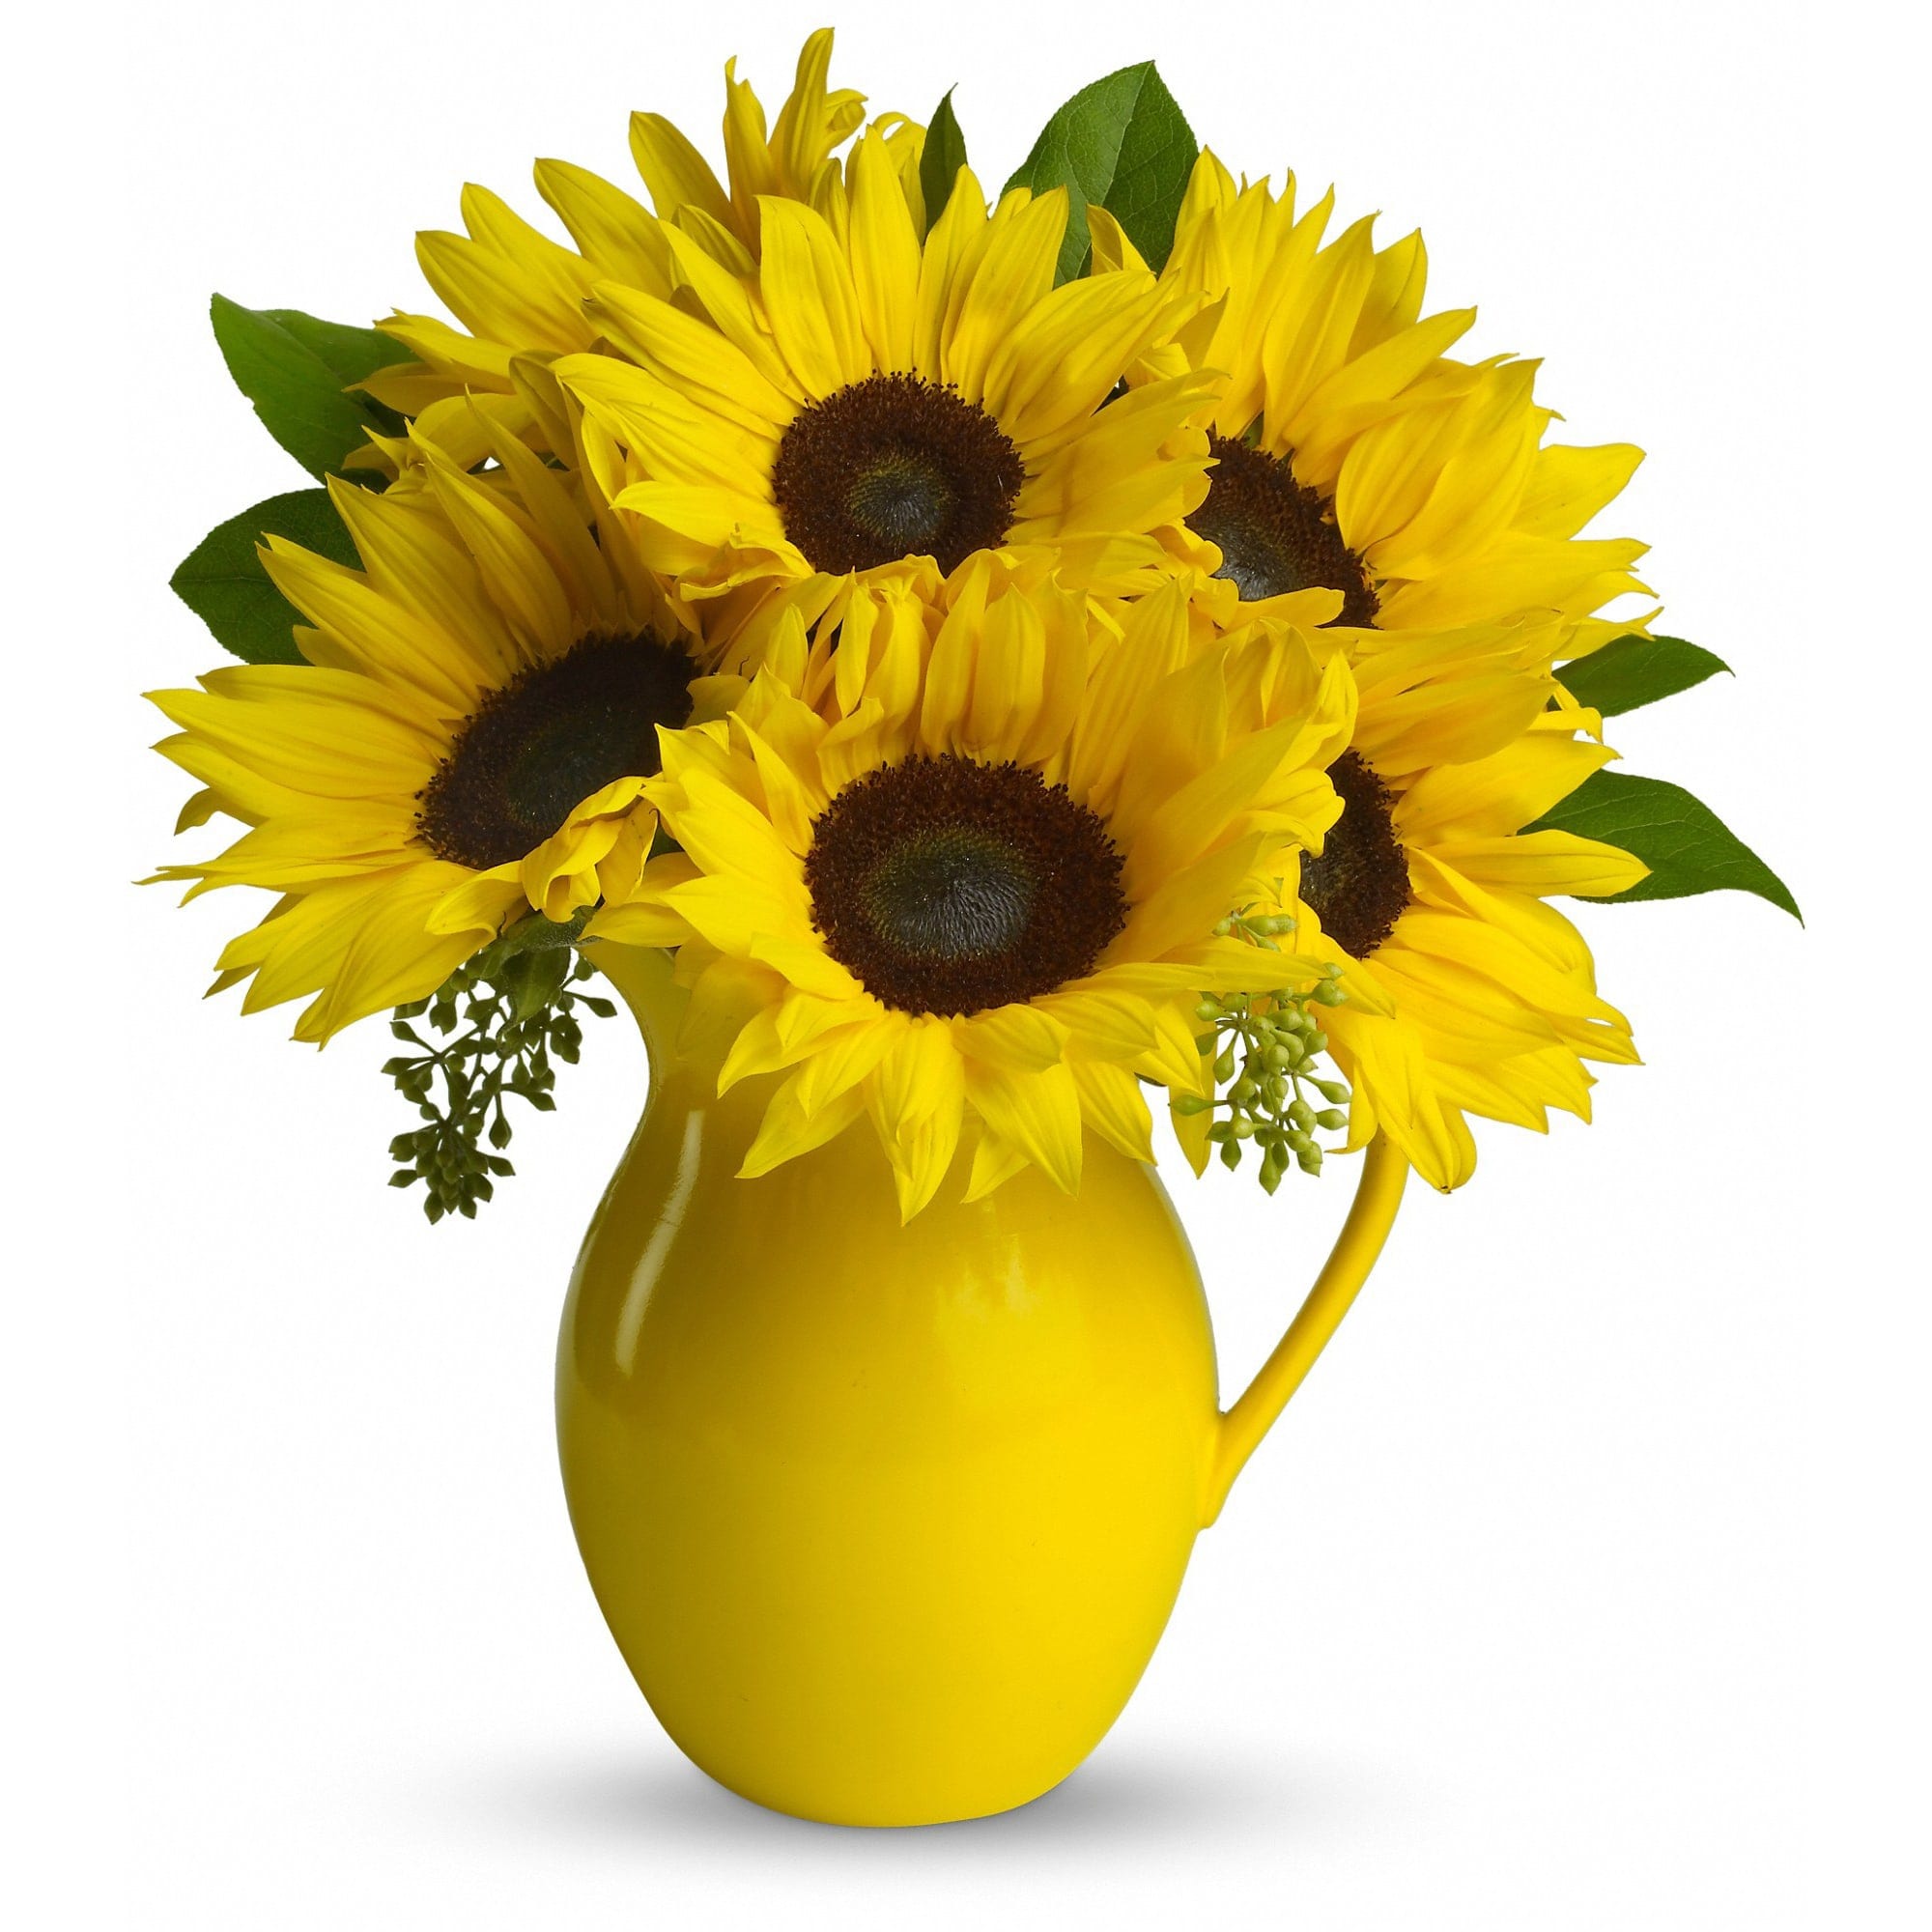 Teleflora's Sunny Day Pitcher of Sunflowers - Pour on the fun by sending this dazzling bouquet of summer's brightest blooms! Great if you're invited to a pool party, BBQ or just want to brighten up someone's day.  Stunning sunflowers, salal and seeded eucalyptus are beautifully arranged in a brilliant yellow ceramic pitcher. This gift will be serving up fun and sun for years to come.  Approximately 13&quot; W x 15 1/2&quot; H  Orientation: All-Around      As Shown : T153-1A     Deluxe : T153-1B     Premium : T153-1C  